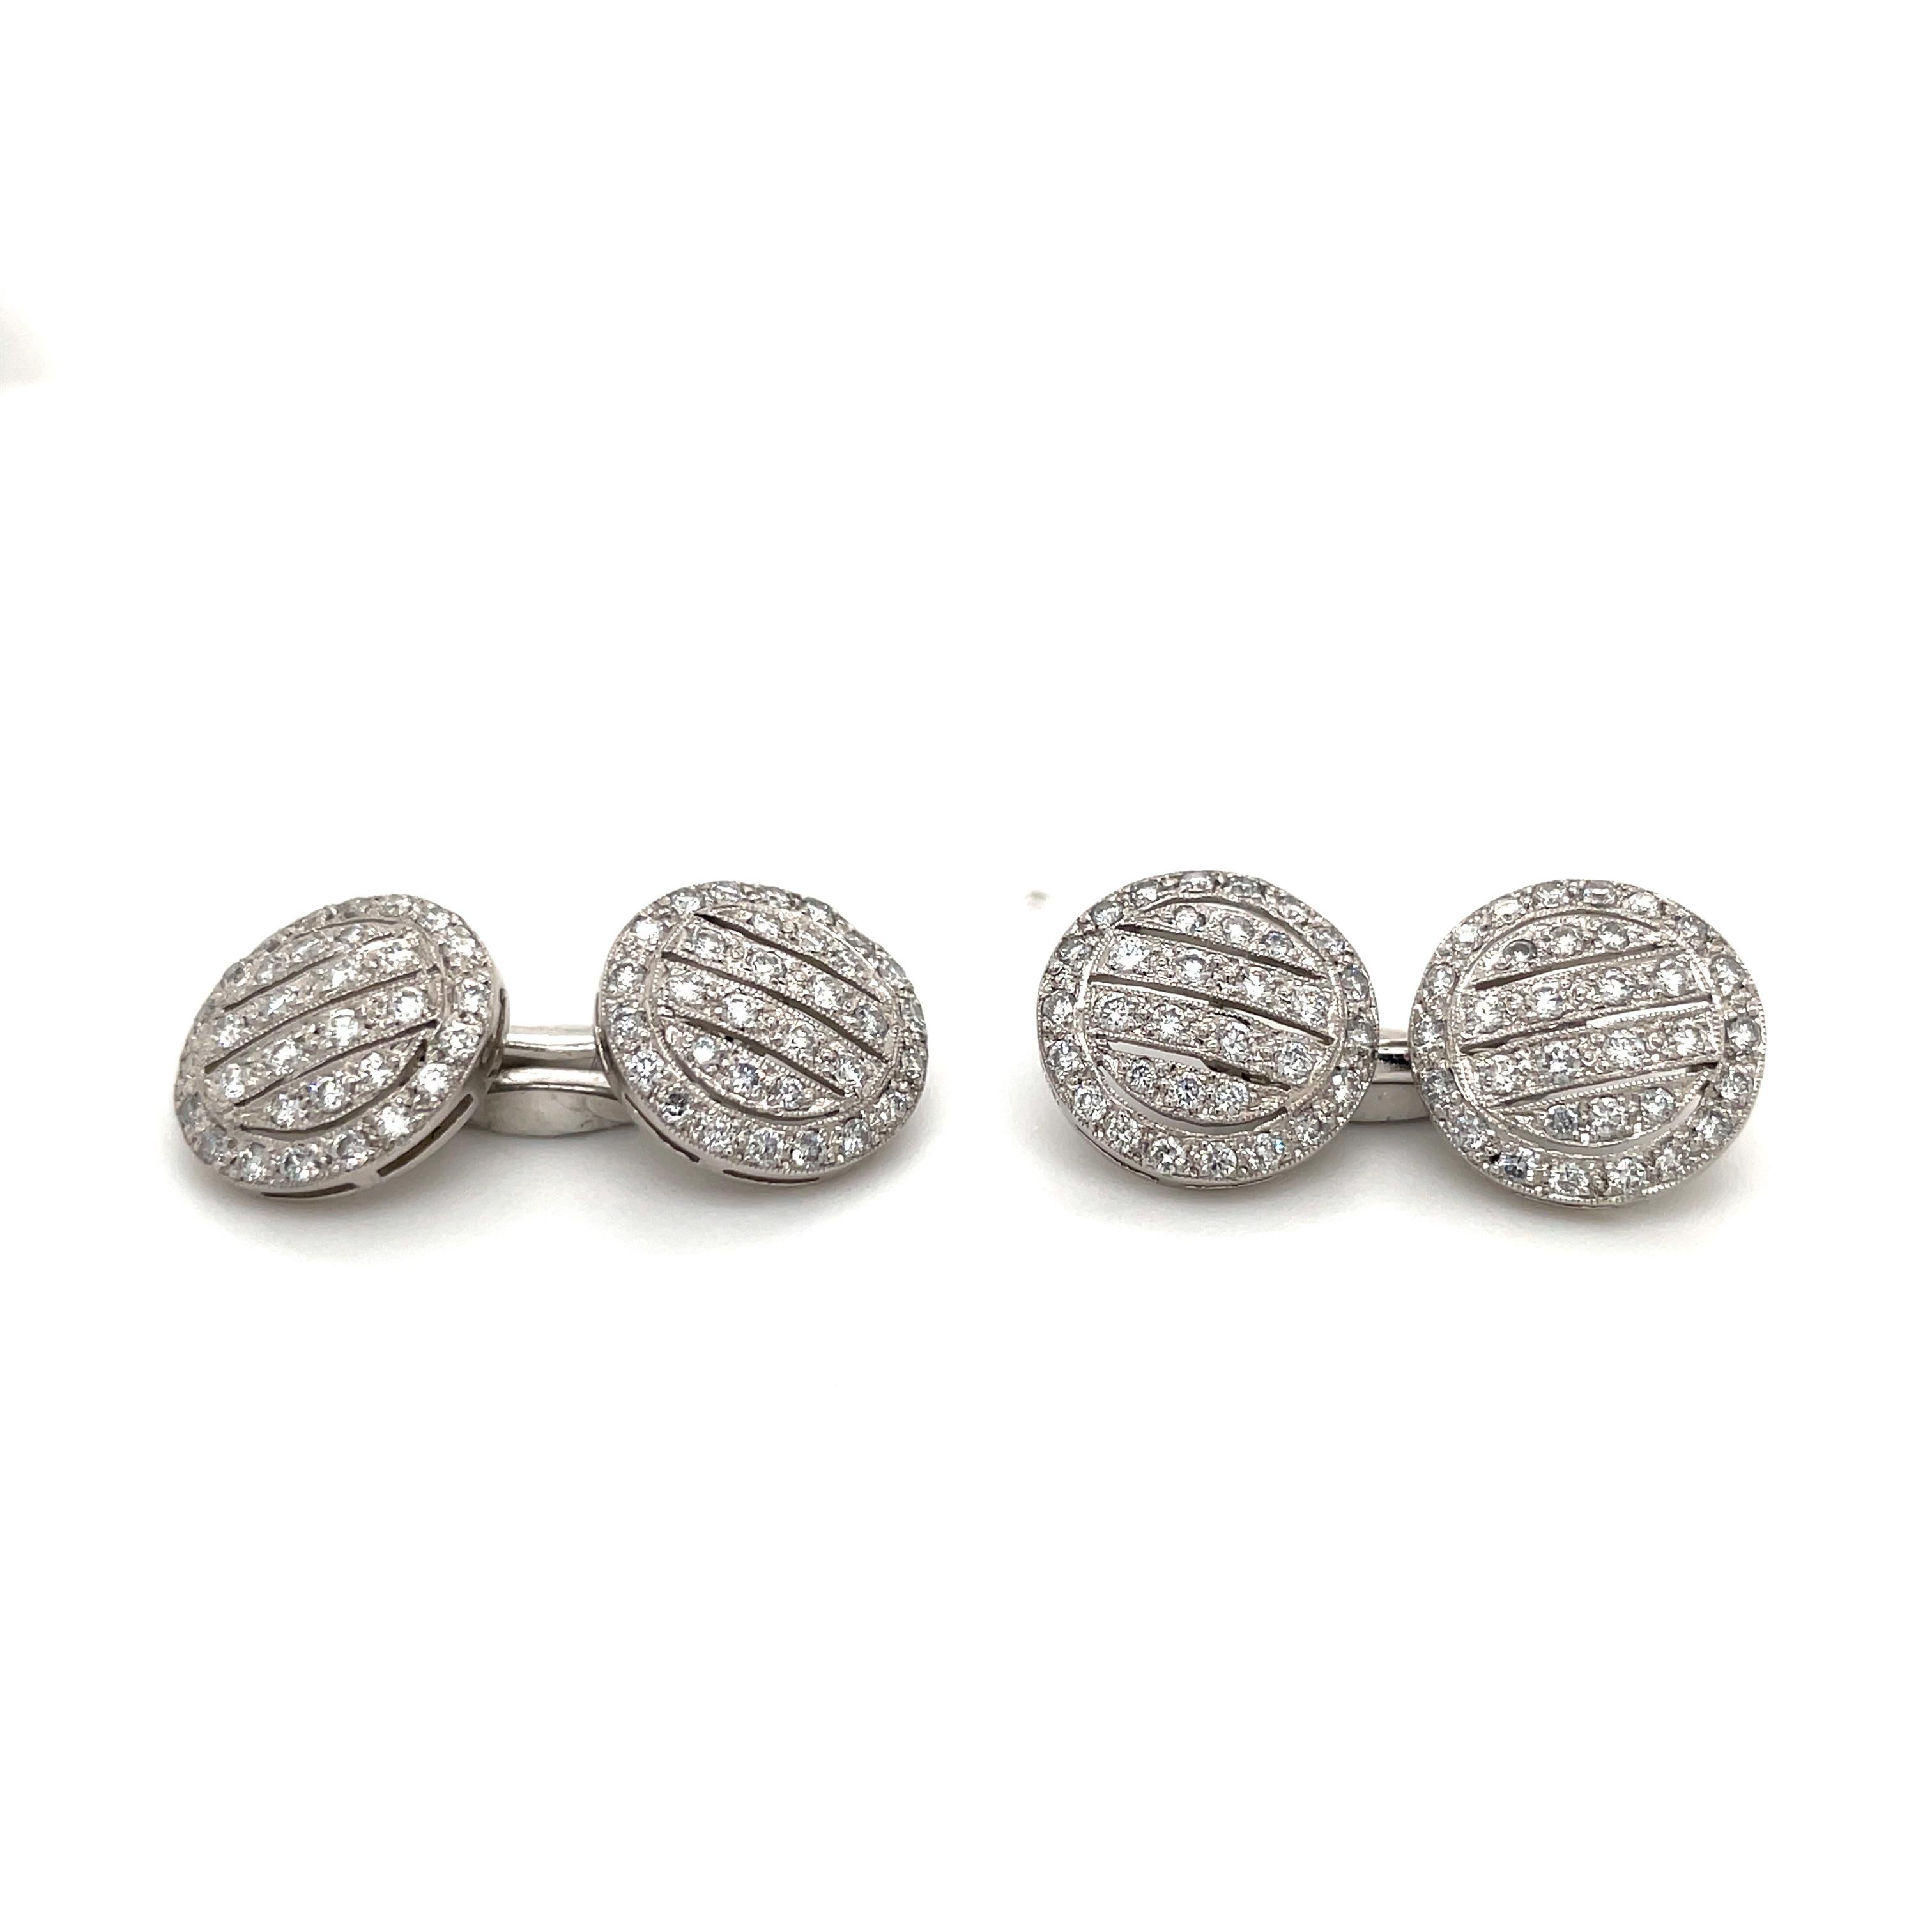  Most brilliant men's dress set.  Double-sided cufflinks and four studs.  Approximately 5.00 carats of full-cut diamonds in an elegant open-work design. A large, full,  dramatic look in the art deco style. Set in platinum. For the gentleman or man